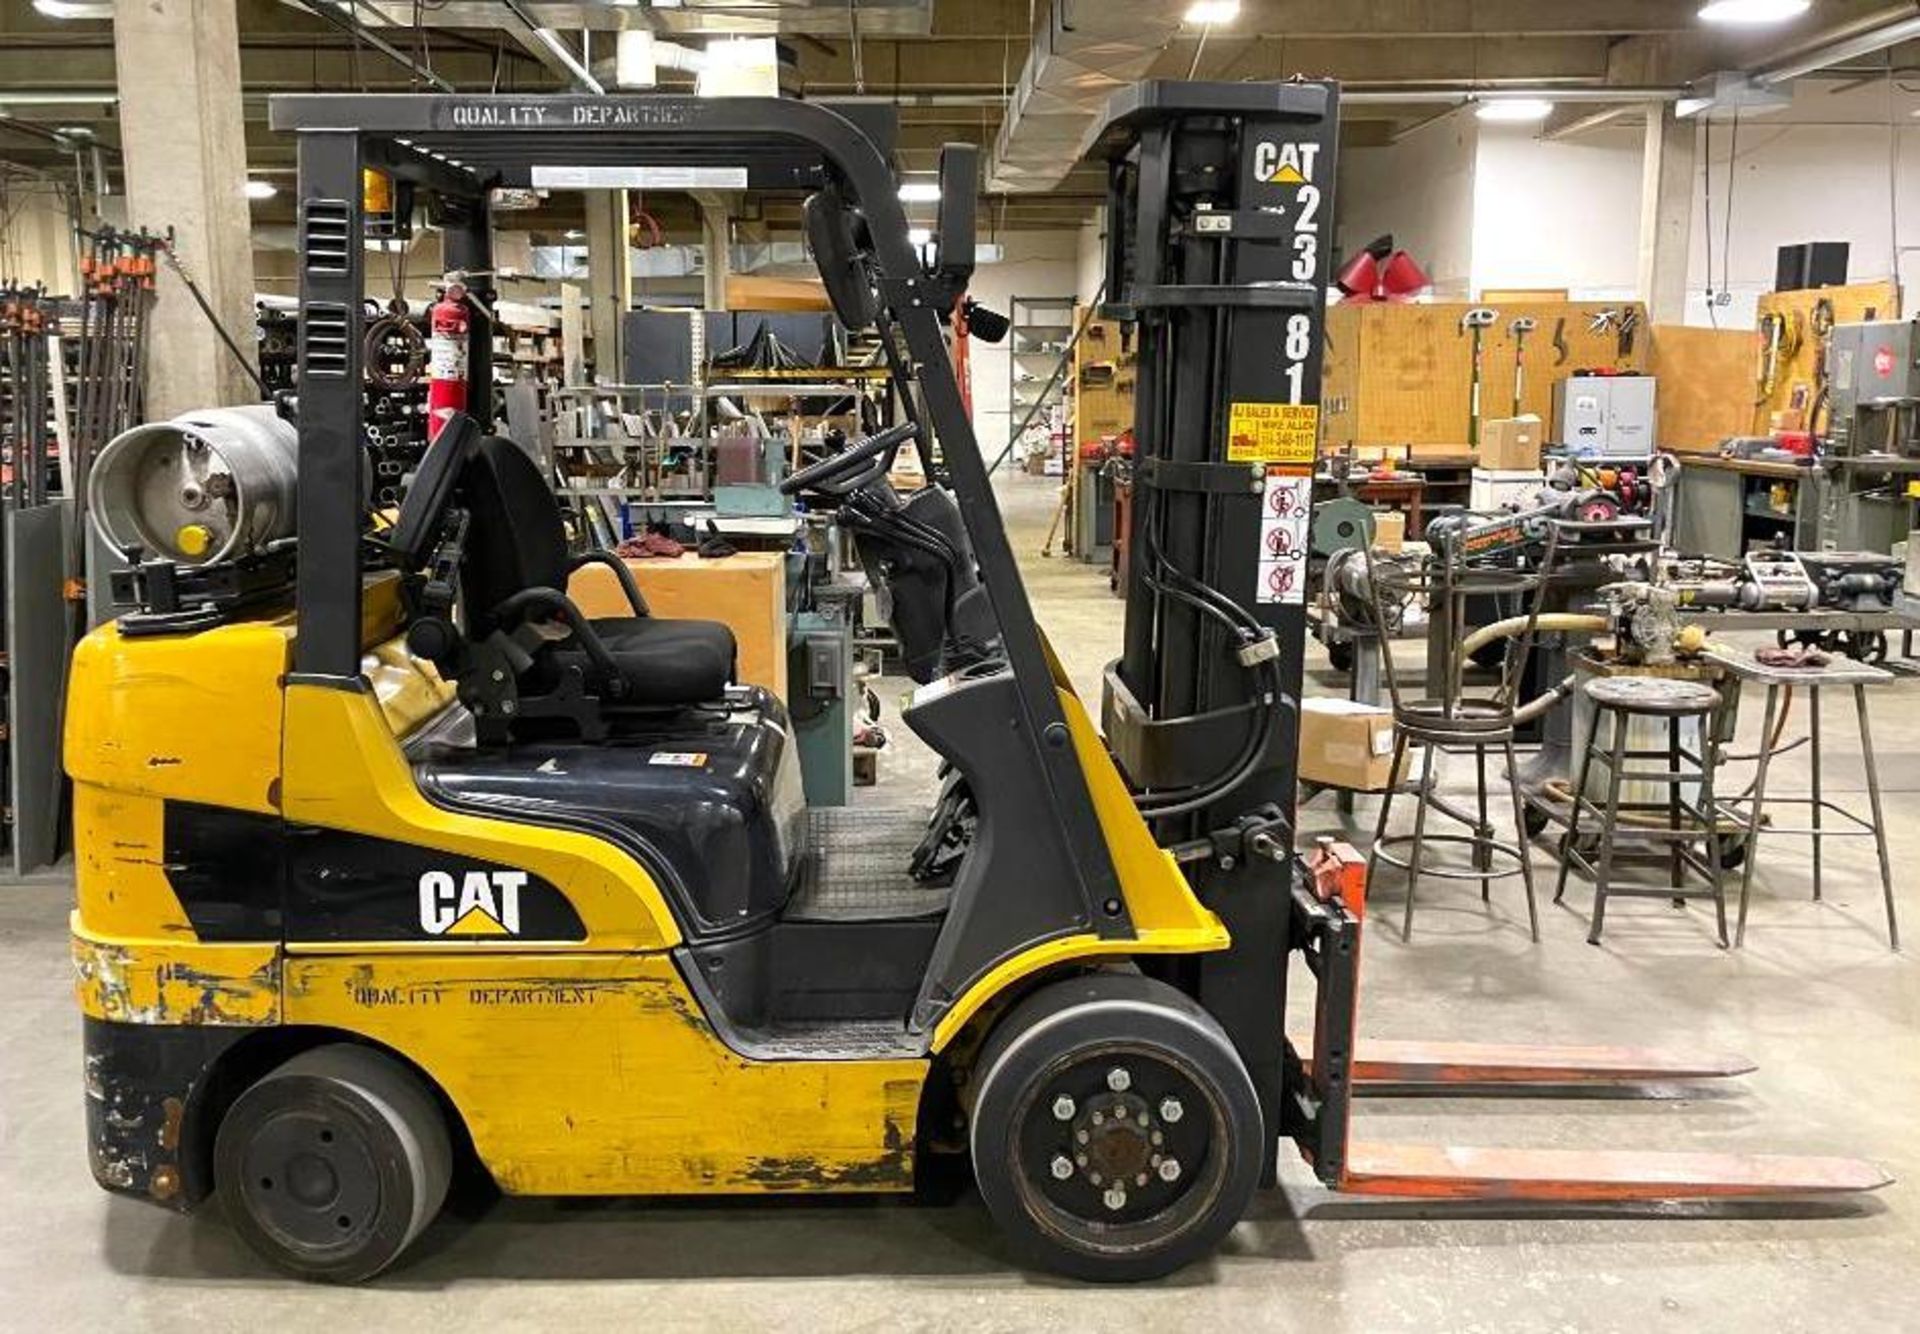 CAT 6,000 LB. FORKLIFT BRAND/MODEL: 2C6000 INFORMATION: 5000 HRS., IN GREAT CONDITION LOCATION: WARE - Image 2 of 18